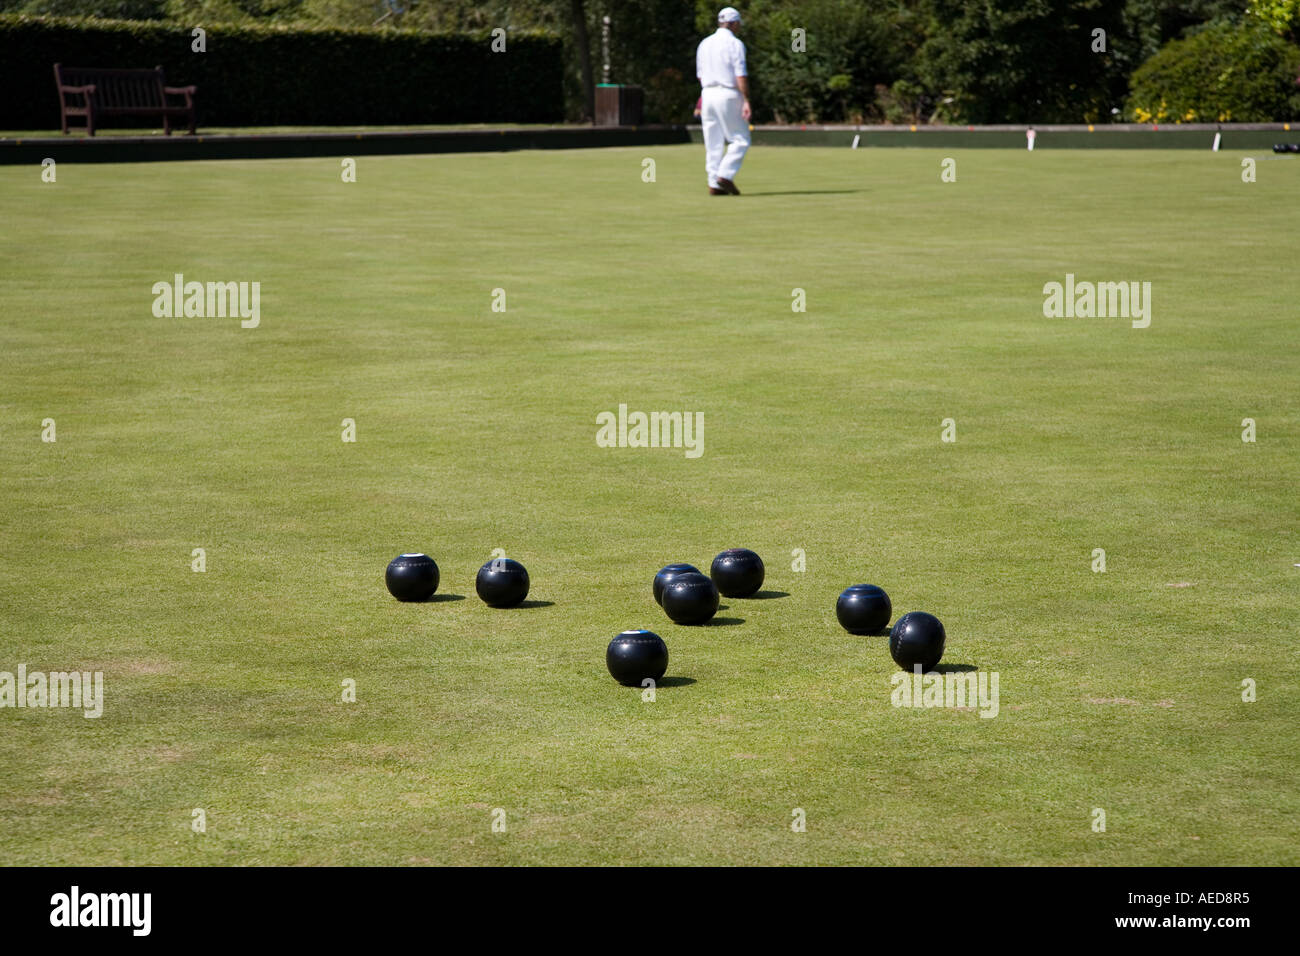 Man walking the length of the green at a bowls match Cardiff Wales UK Stock Photo